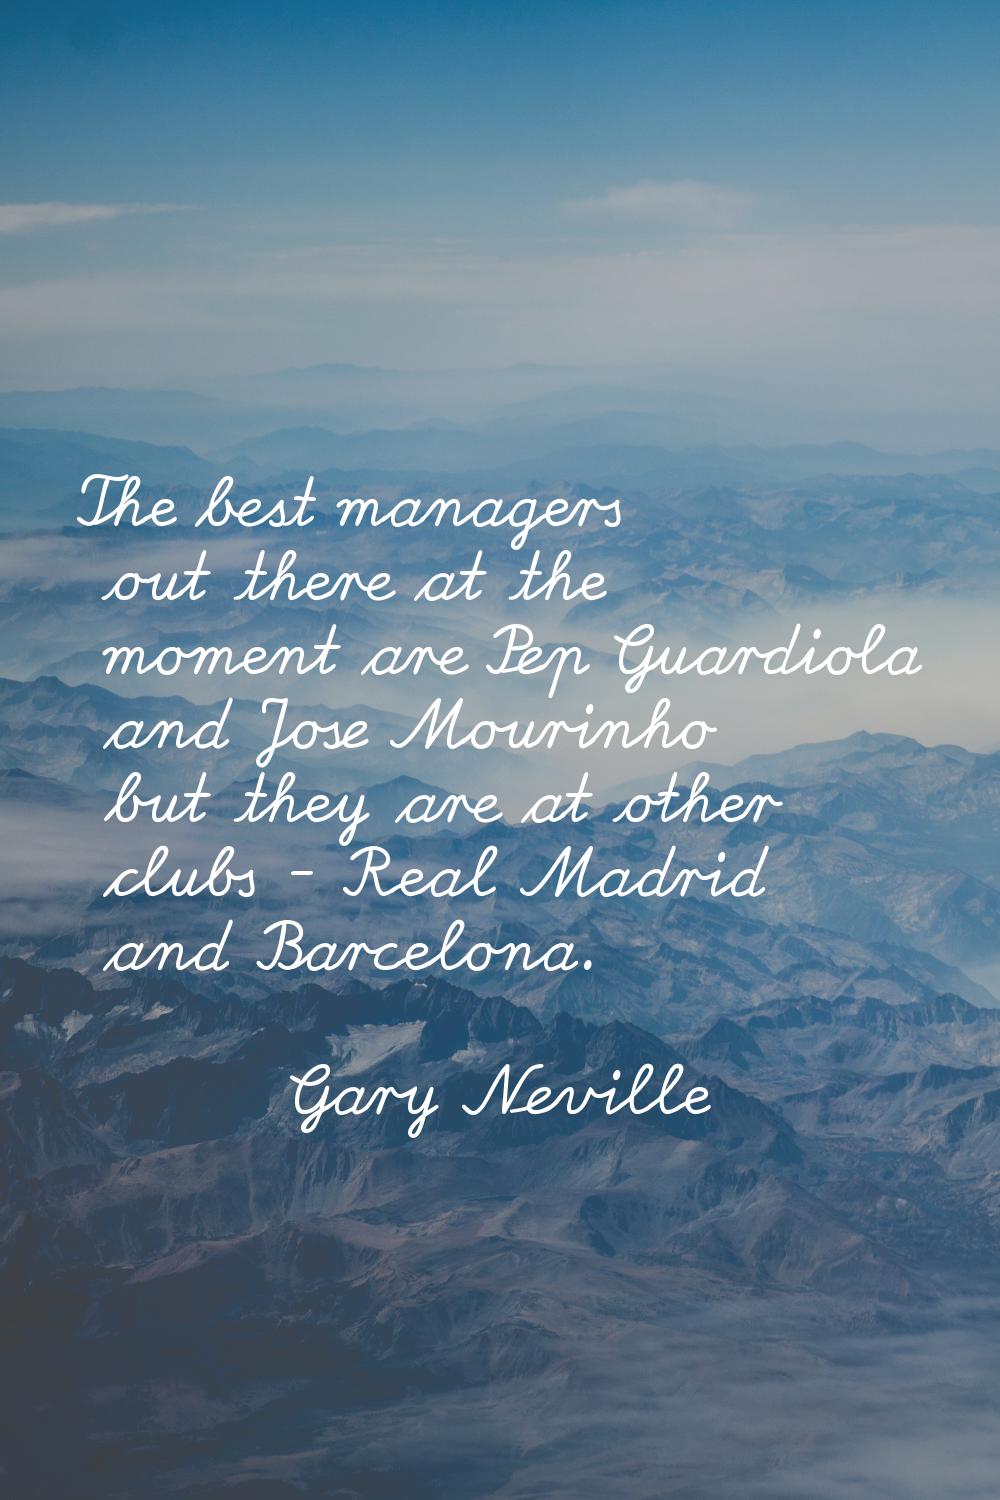 The best managers out there at the moment are Pep Guardiola and Jose Mourinho but they are at other